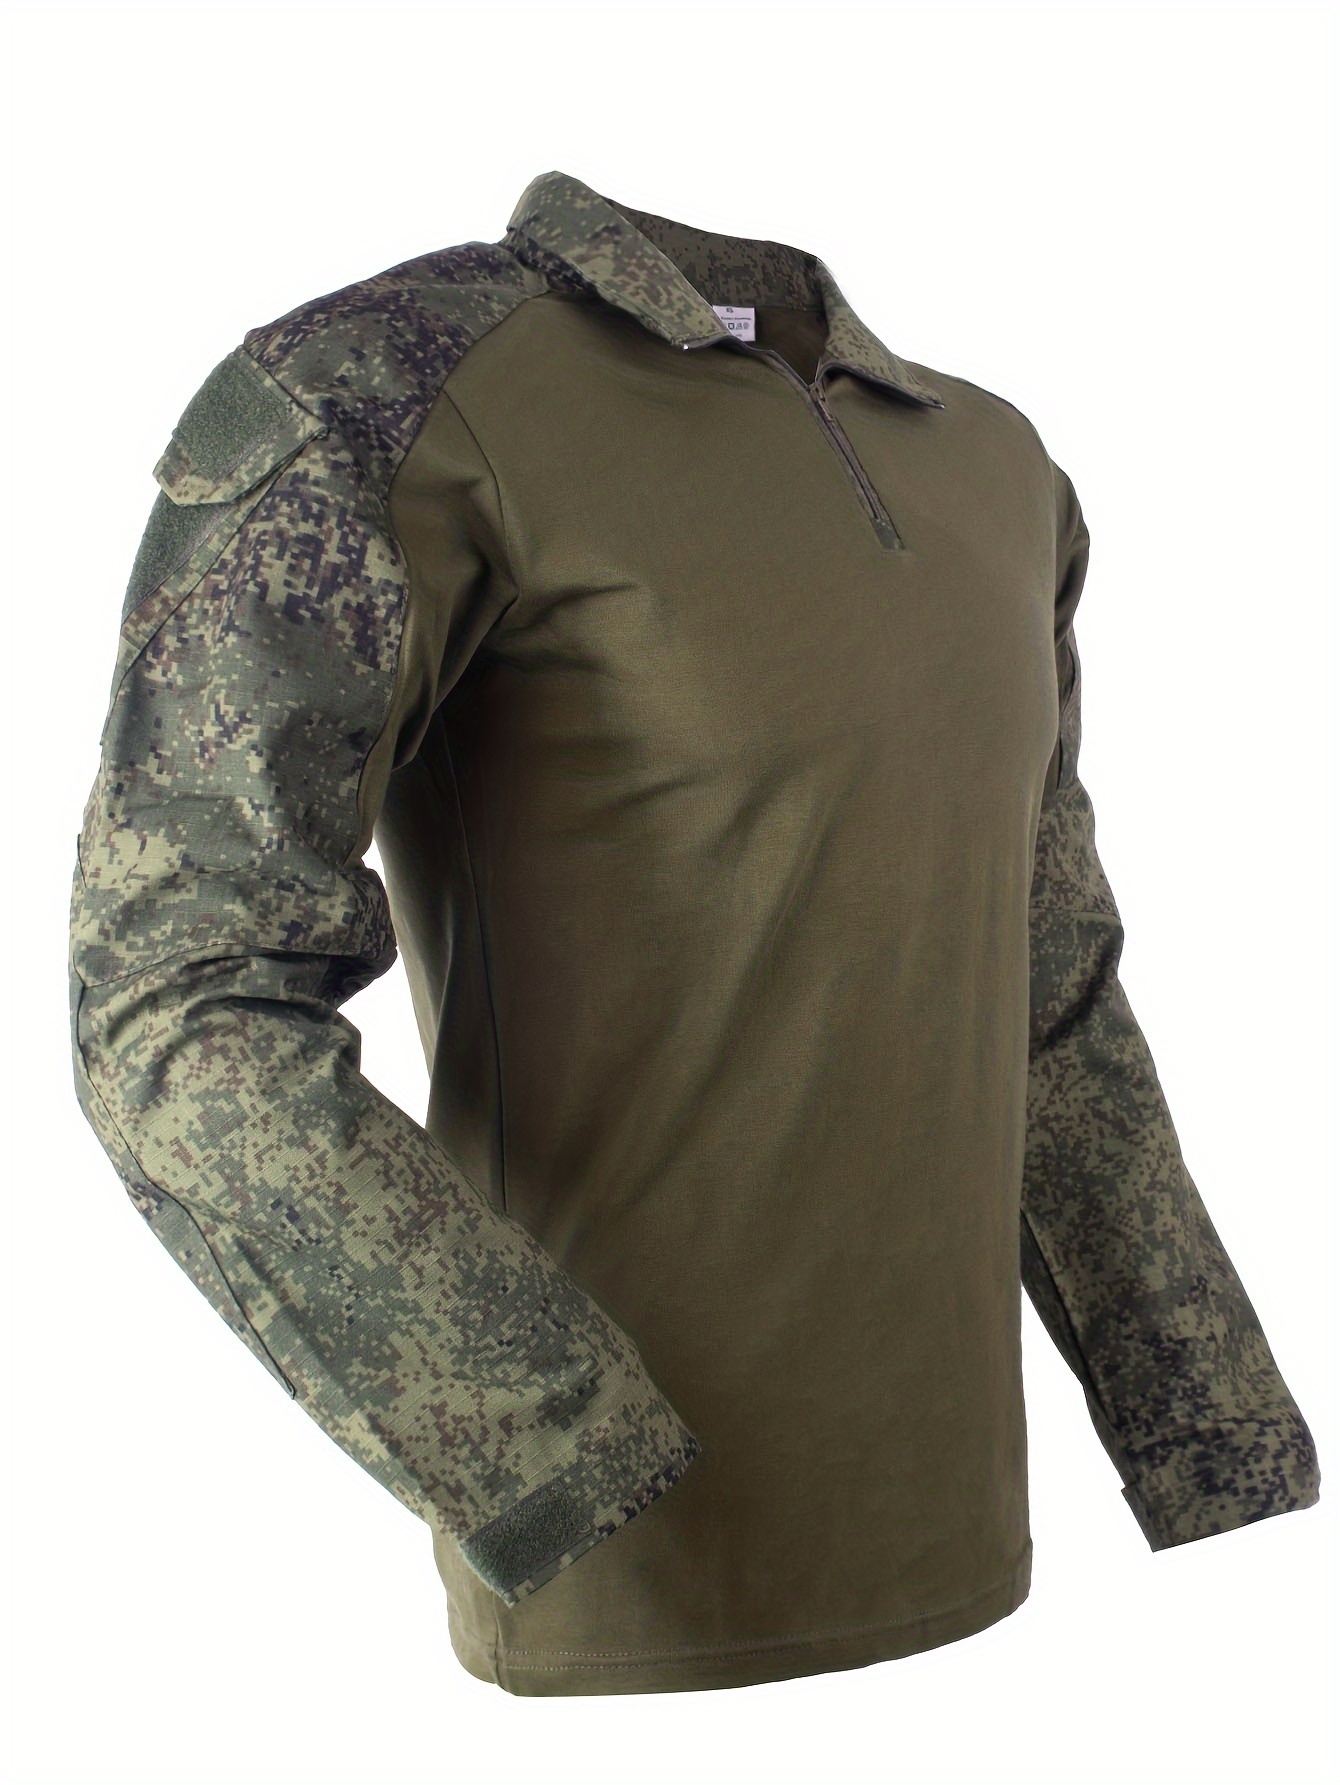 Men's Leisure Cotton Shirts Female Tactical Blouse Hiking Camping